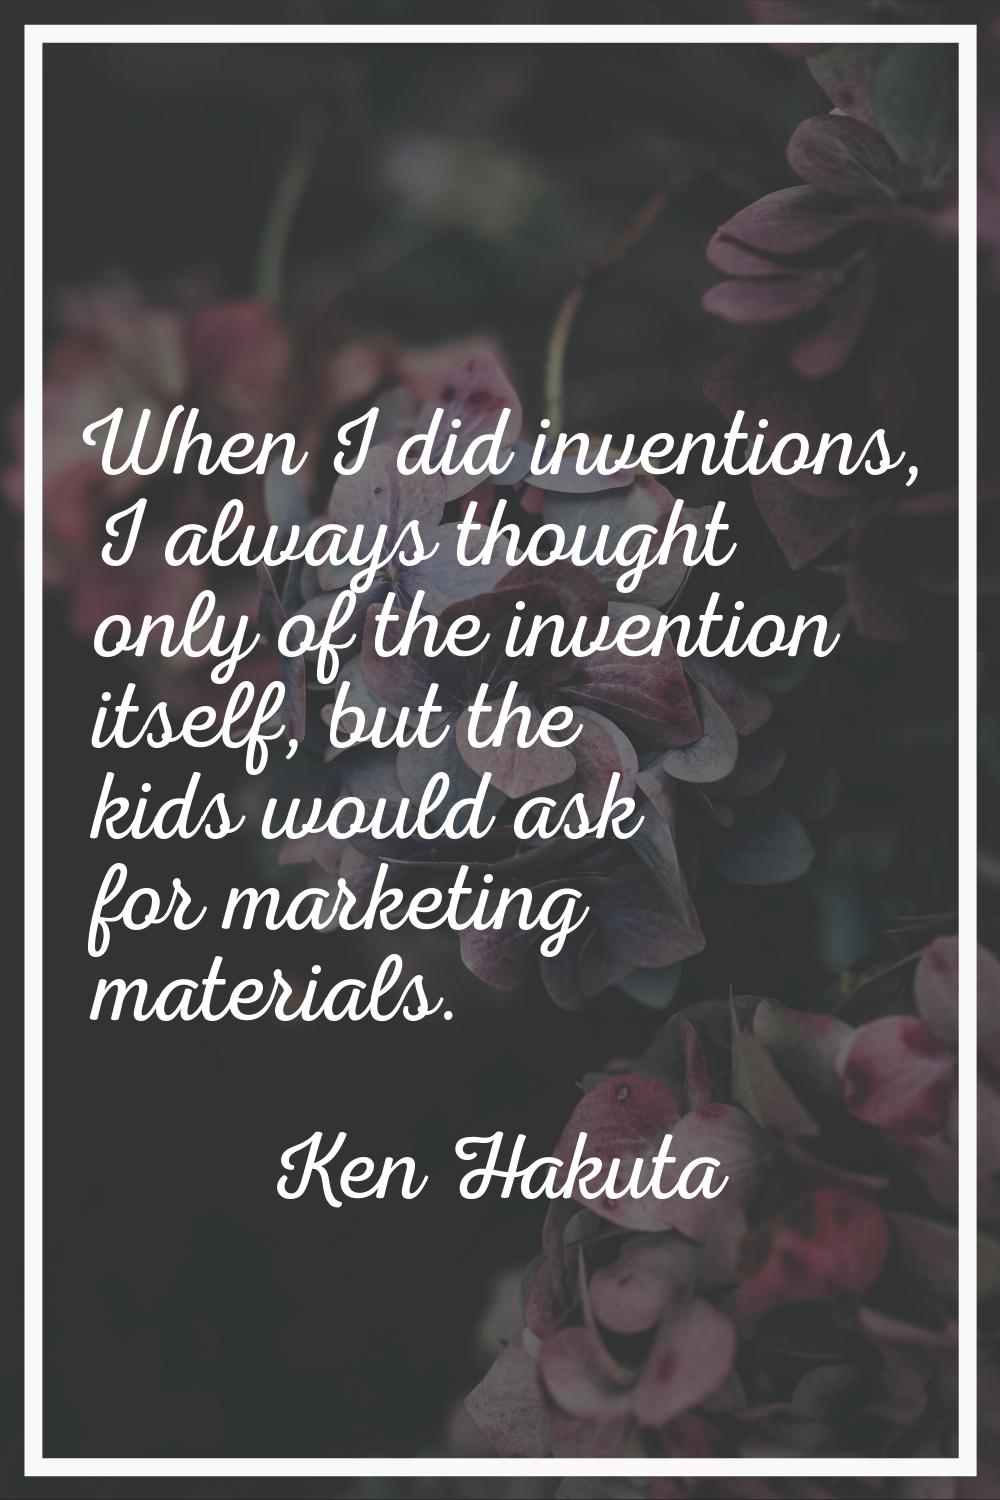 When I did inventions, I always thought only of the invention itself, but the kids would ask for ma